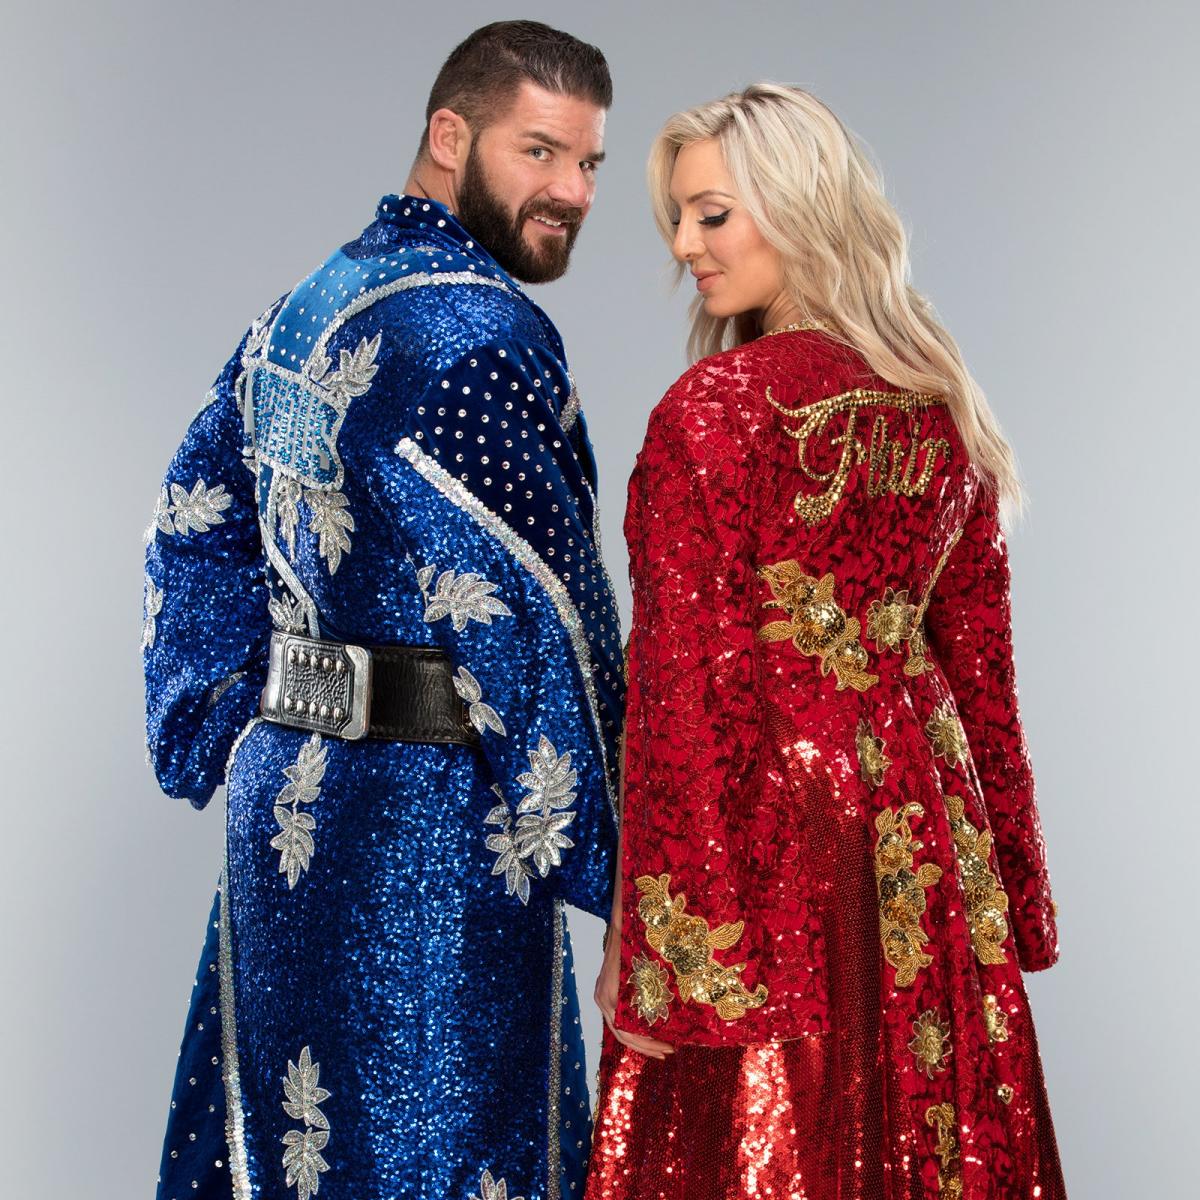 Wwe Image Bobby Roode And Charlotte Flair HD Wallpaper